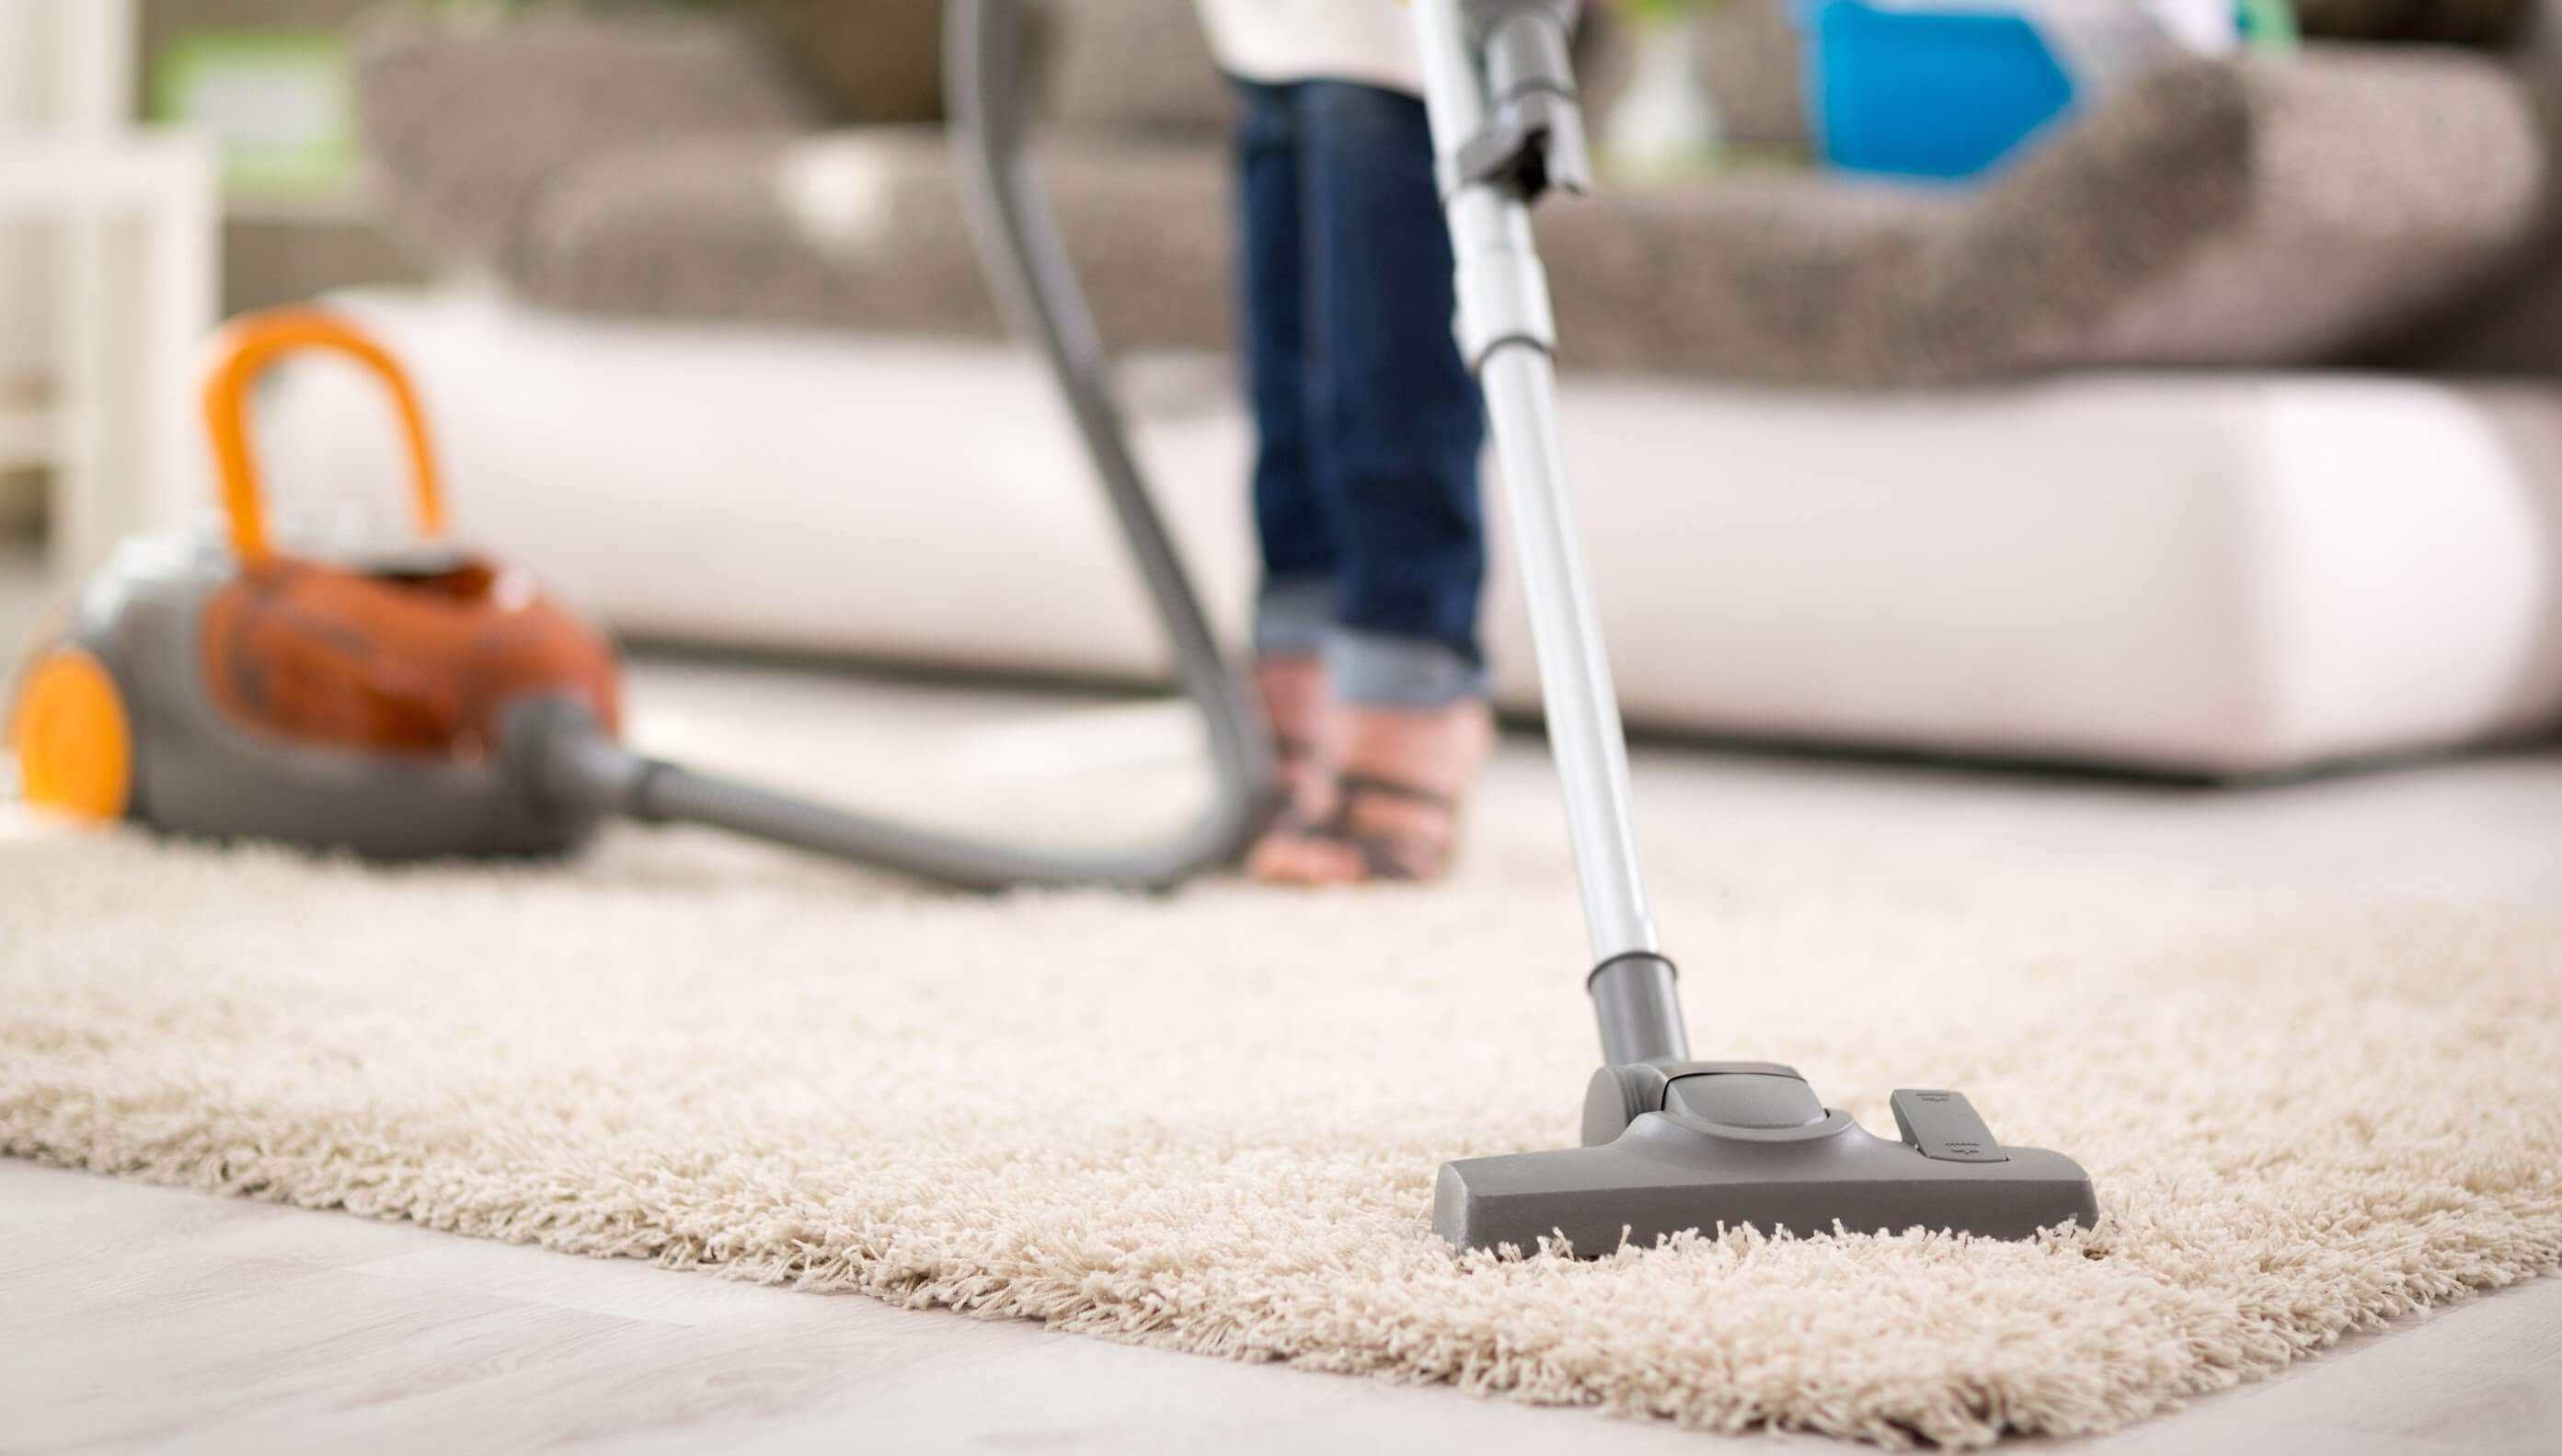 How To Use A Wet Vac To Clean Carpet? 